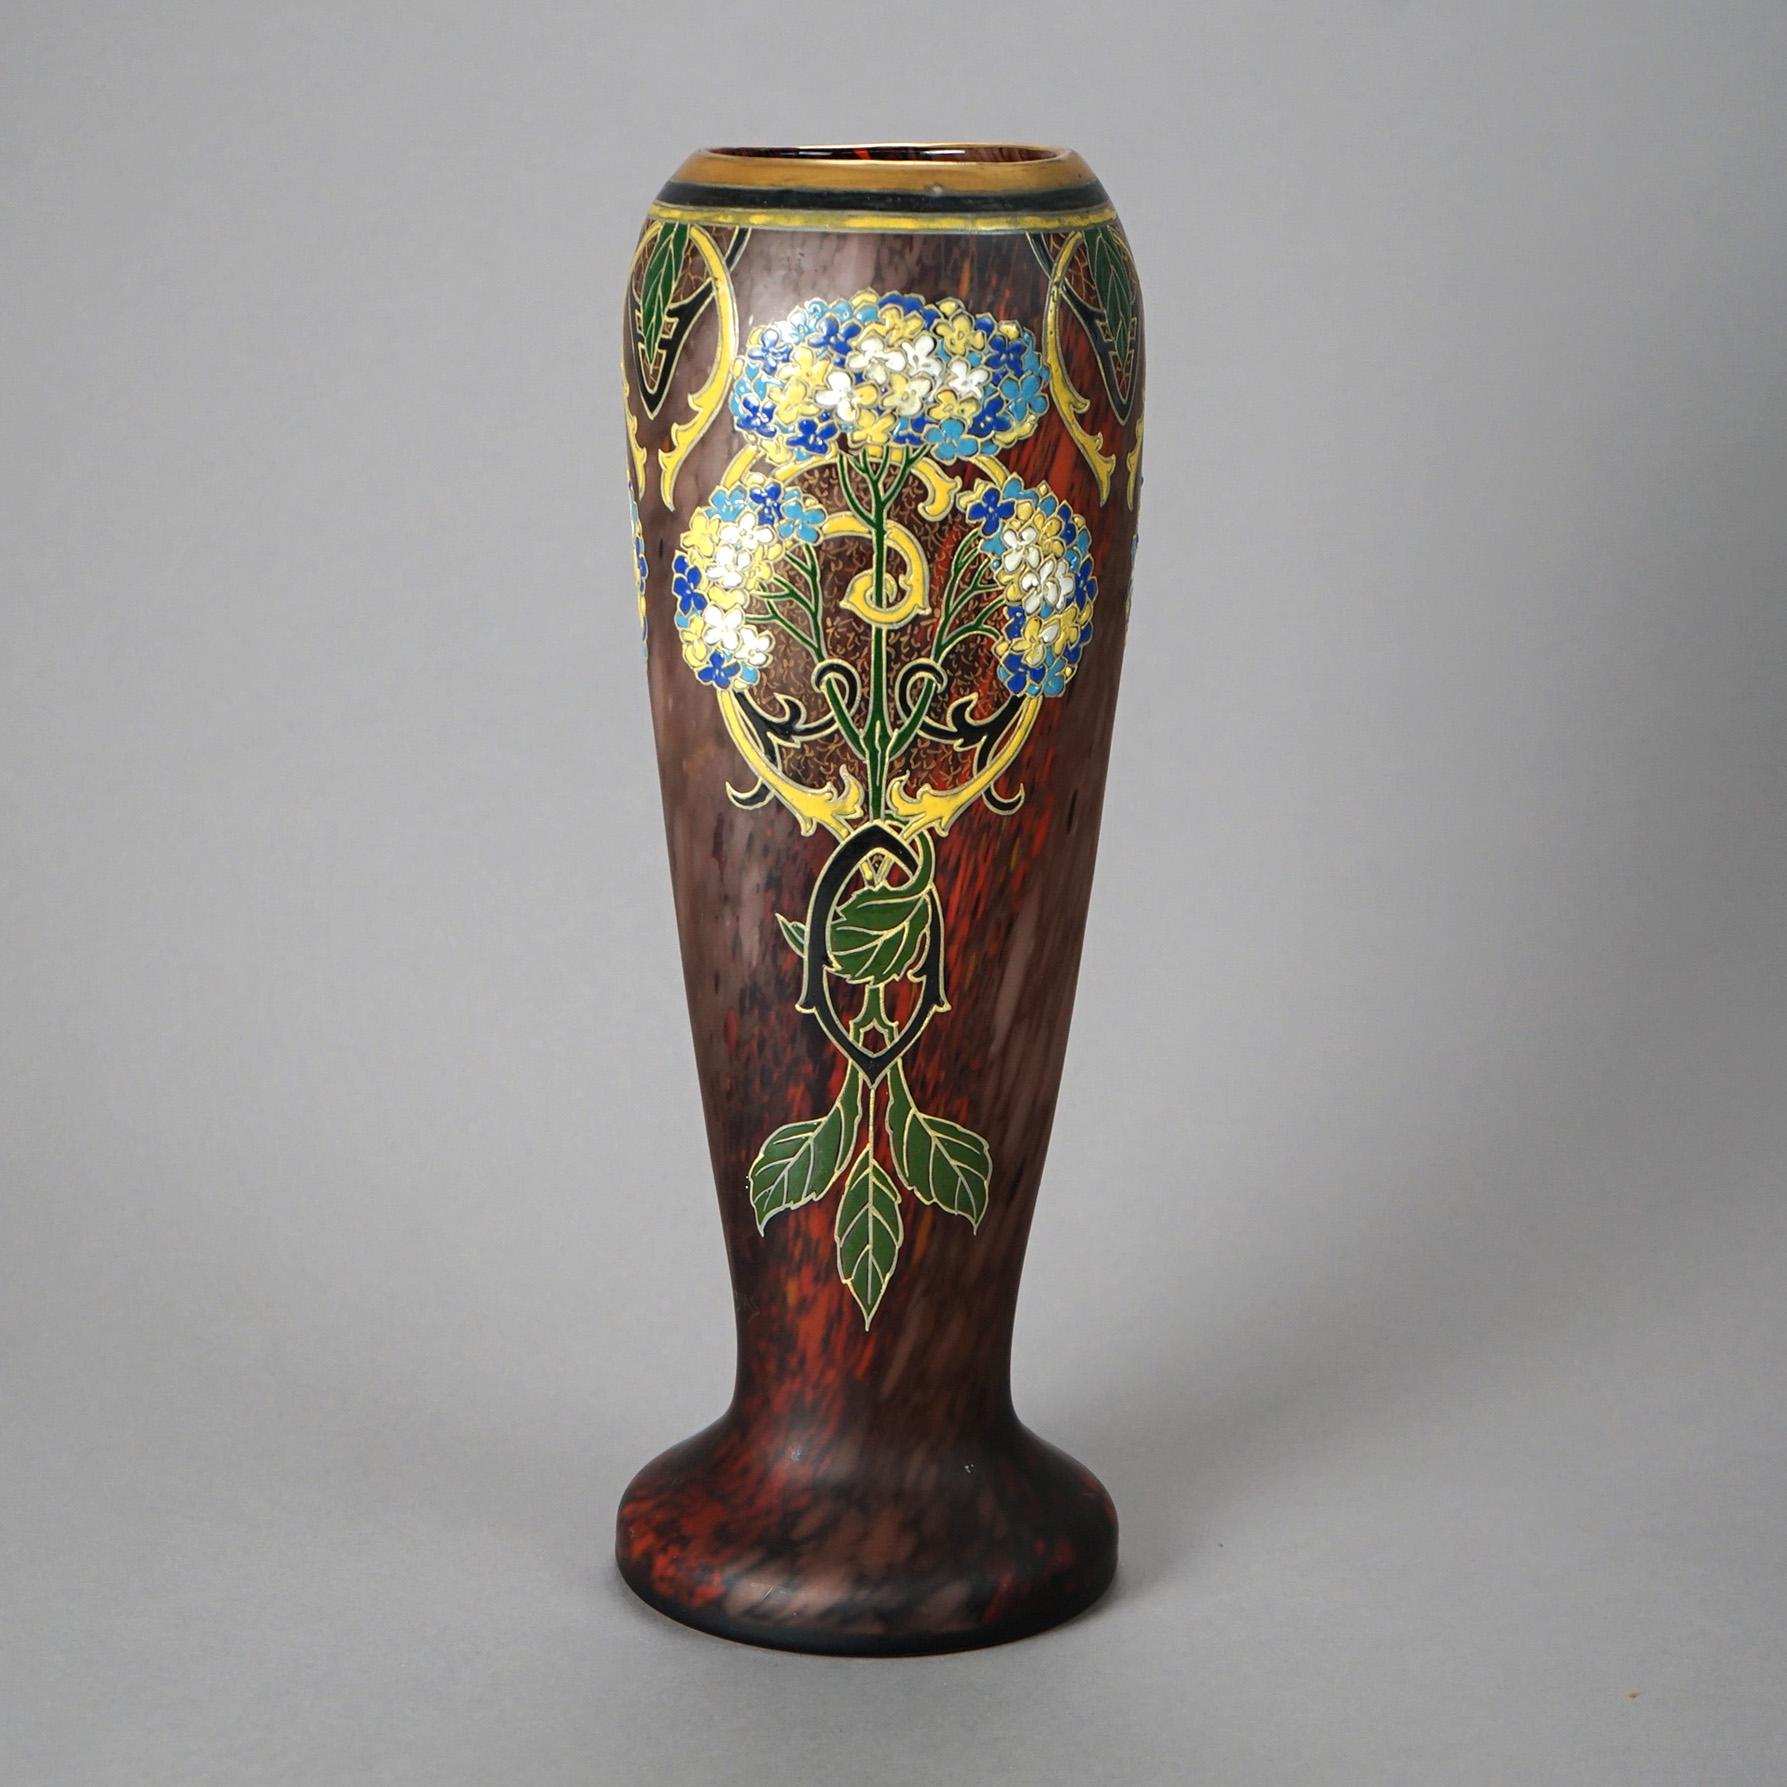 An antique large Art Nouveau vase by François Theodore Legras of France offers hand blown art glass construction with hand enameled stylized trellises, scrollwork and hydrangea flowers, c1890

Measures - 15.5